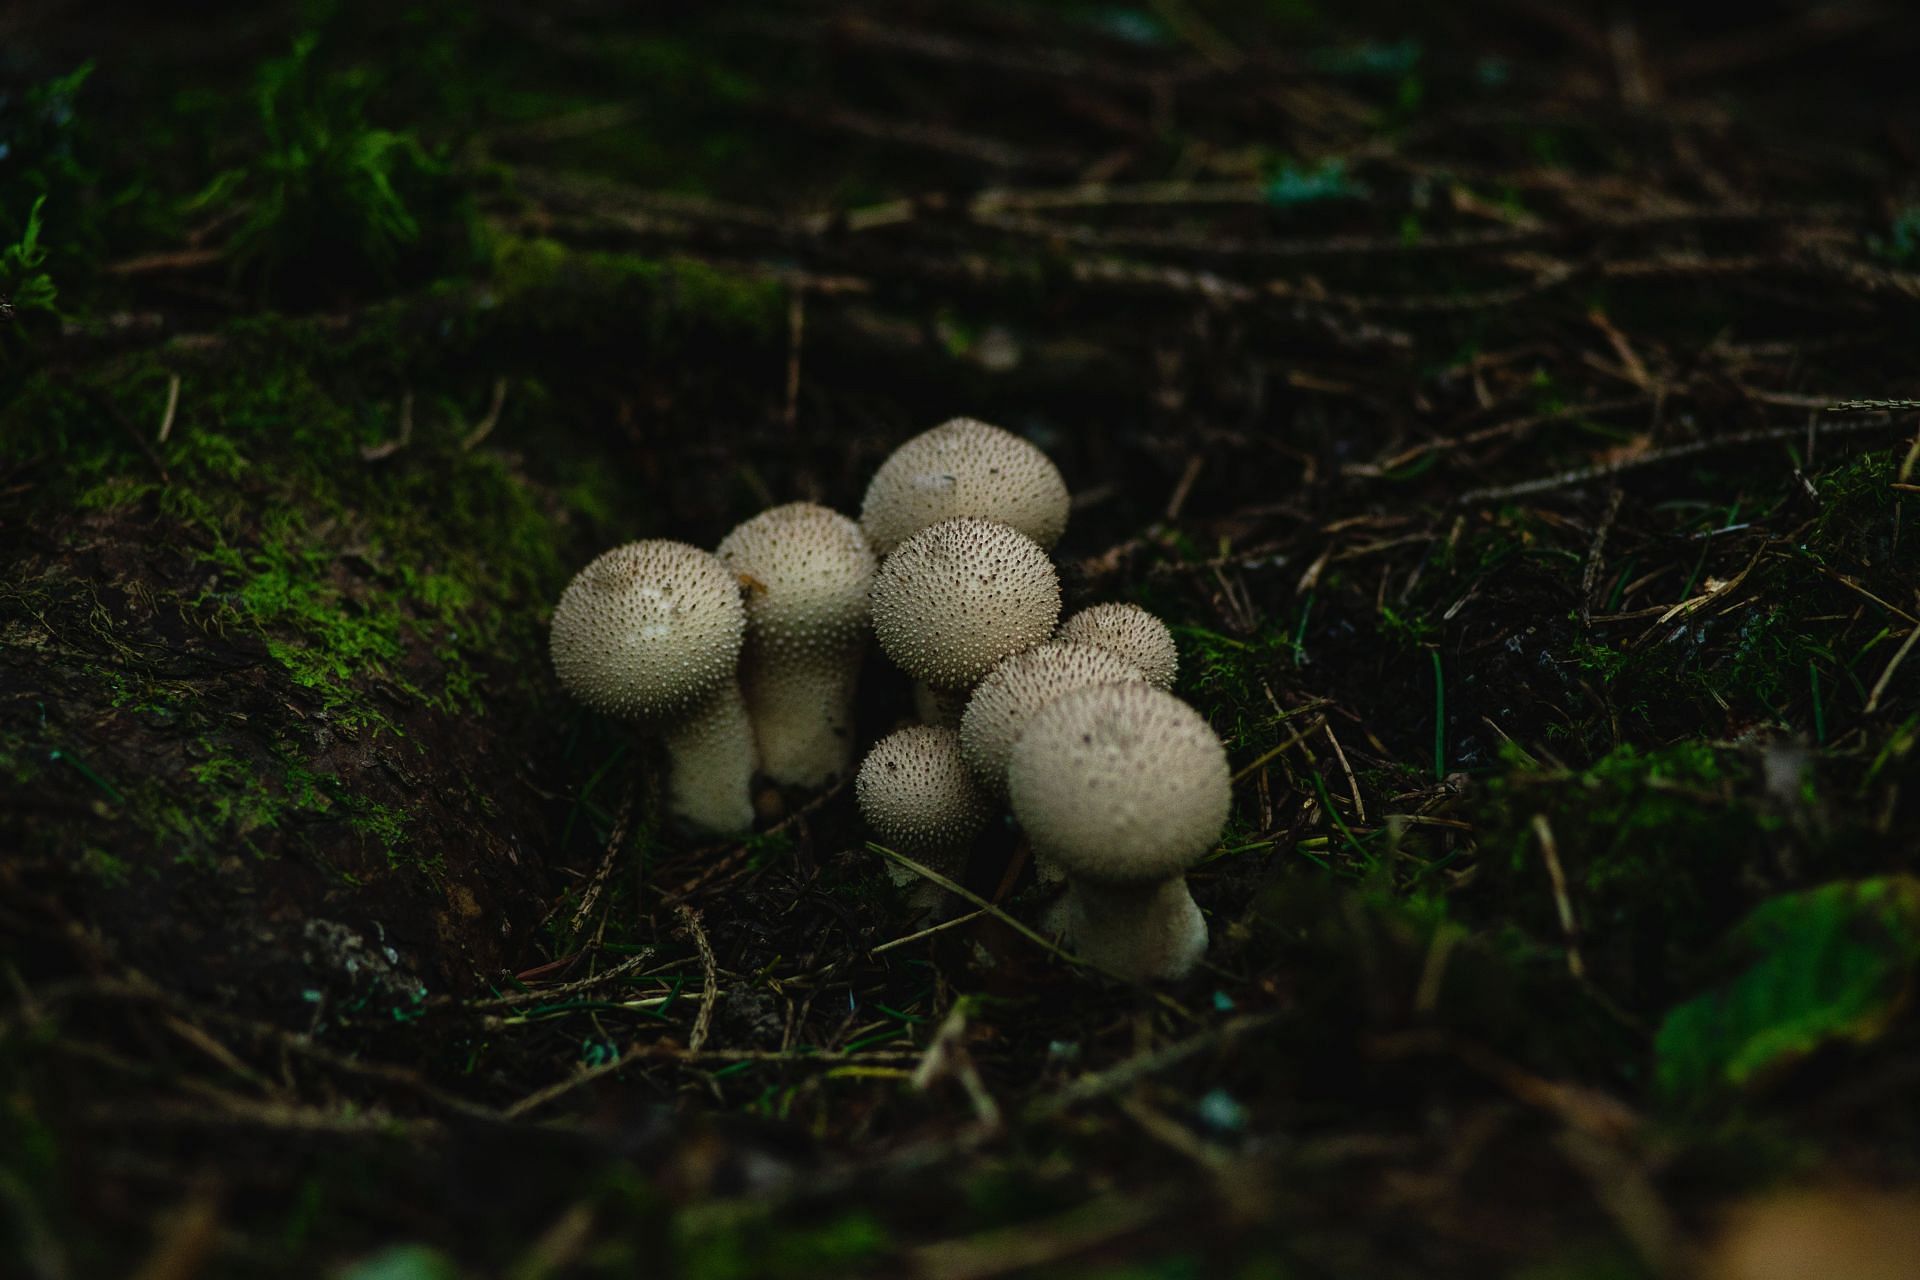 One should be cautious in identifying puffballs. (Image via Unsplash/ Olli Kilpi)